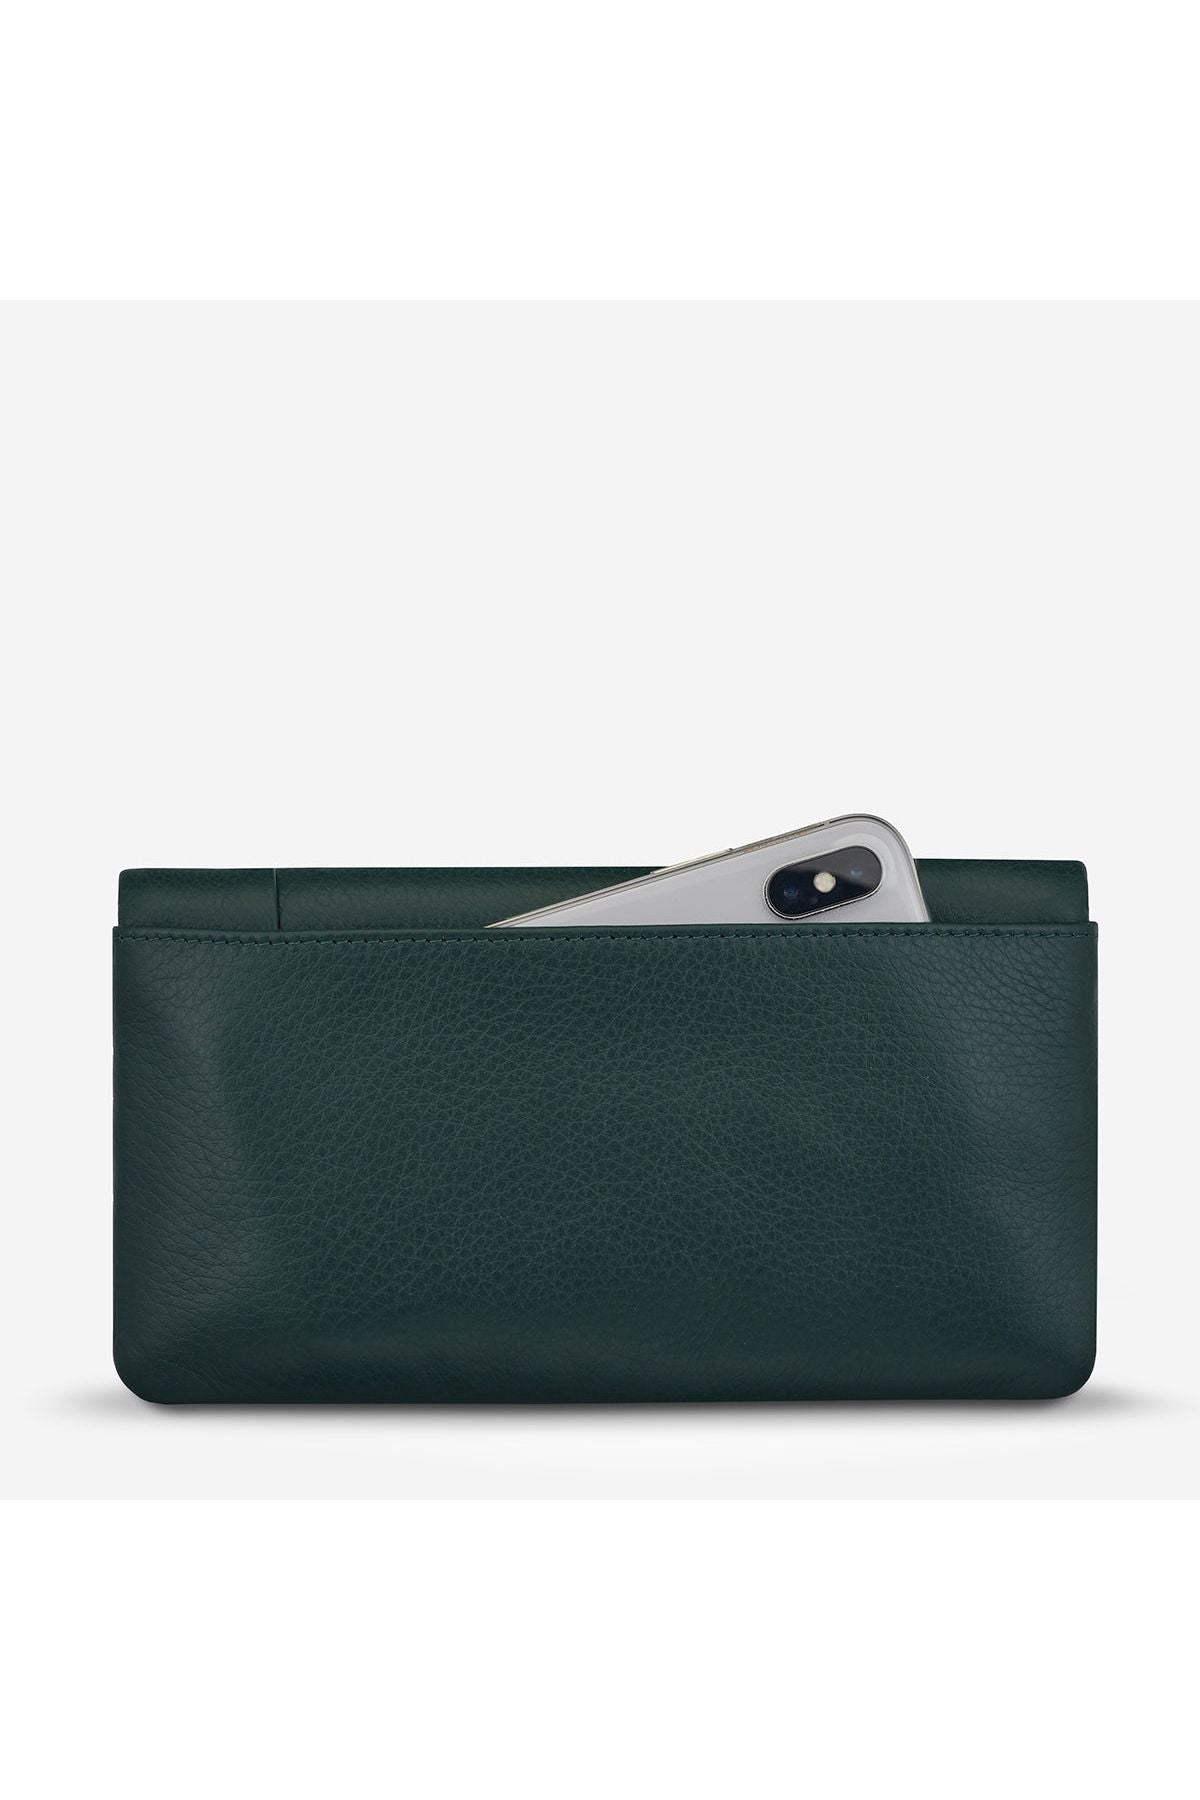 Status Anxiety - Some Type of Love Wallet - Teal